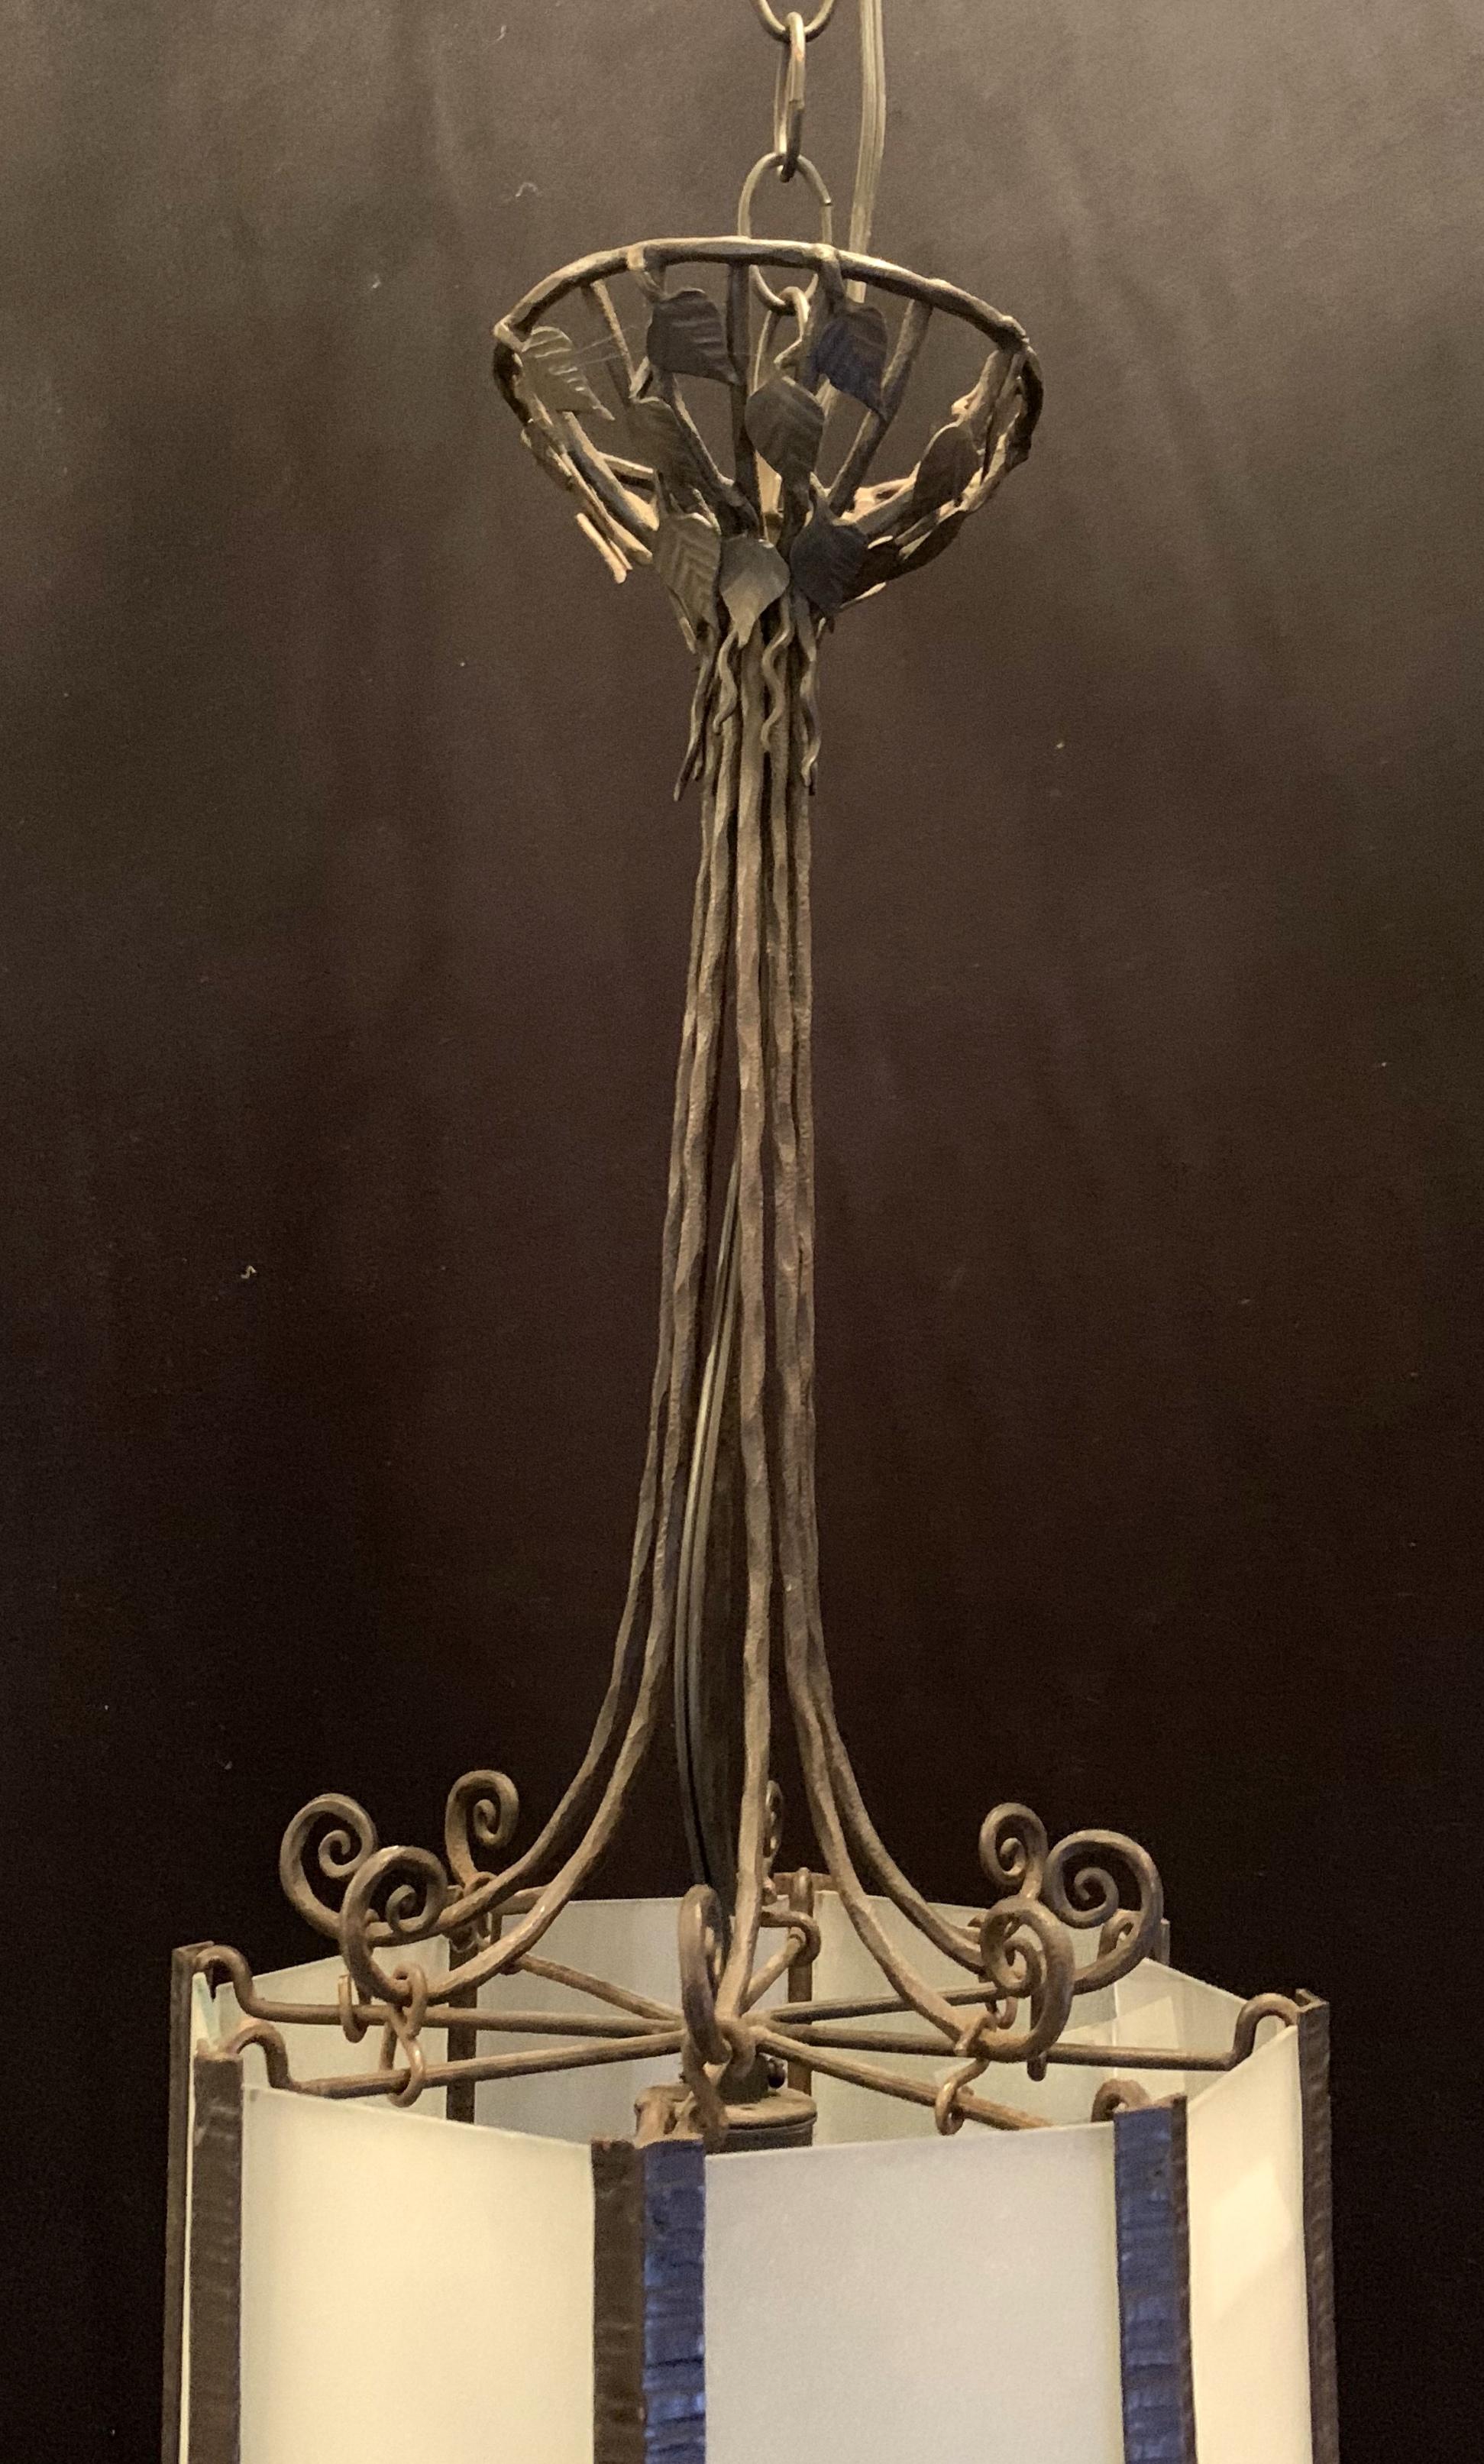 A wonderful art deco scroll, flower & leaf iron & frosted glass lantern fixture with single edison light in the manner of Edgar Brandt.